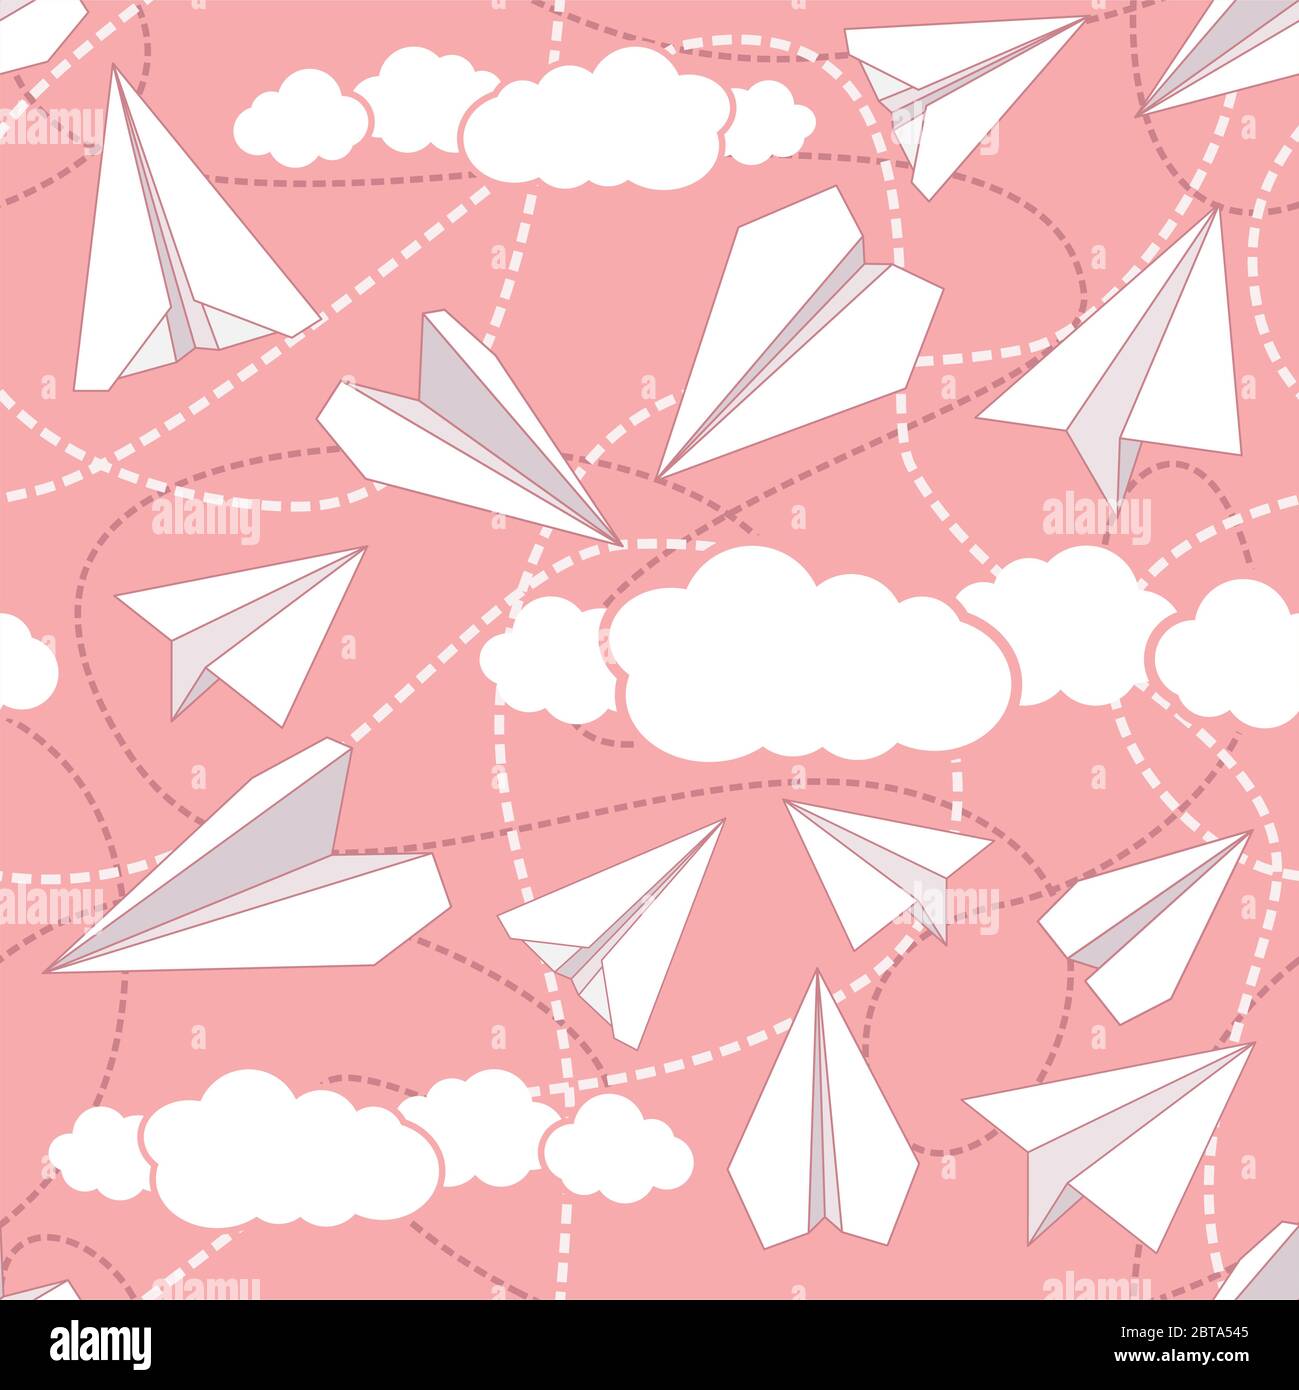 Paper planes seamless vector pattern. Repeating abstract background with paper planes. Papercraft airplanes texture. Paper planes flying in clouds. Stock Vector